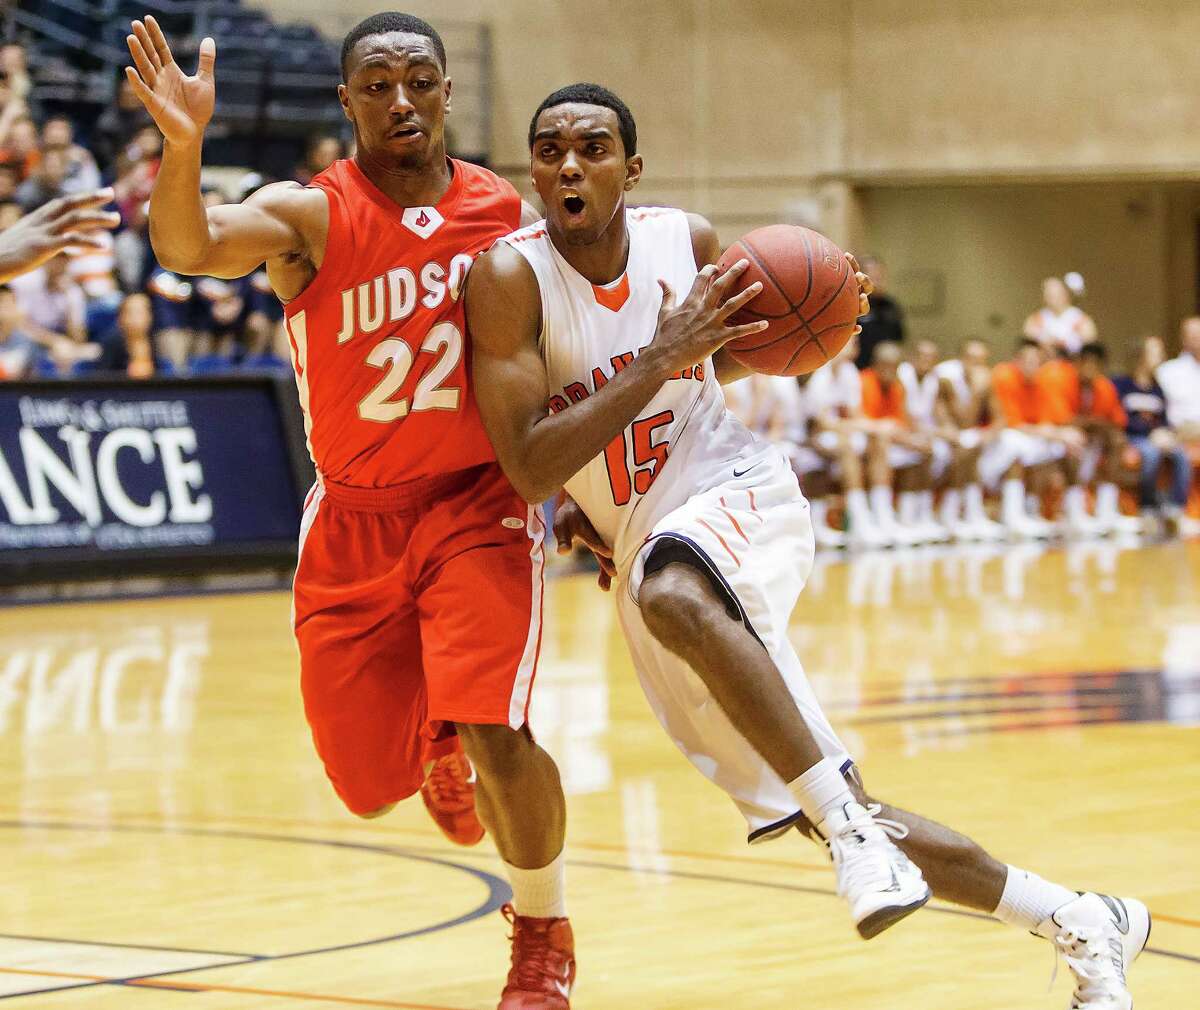 Brandeis' Justin Graham (right) tries to drive past Judson's Jarveon Williams during the second quarter at the Convocation Center. The Broncos won 60-53.